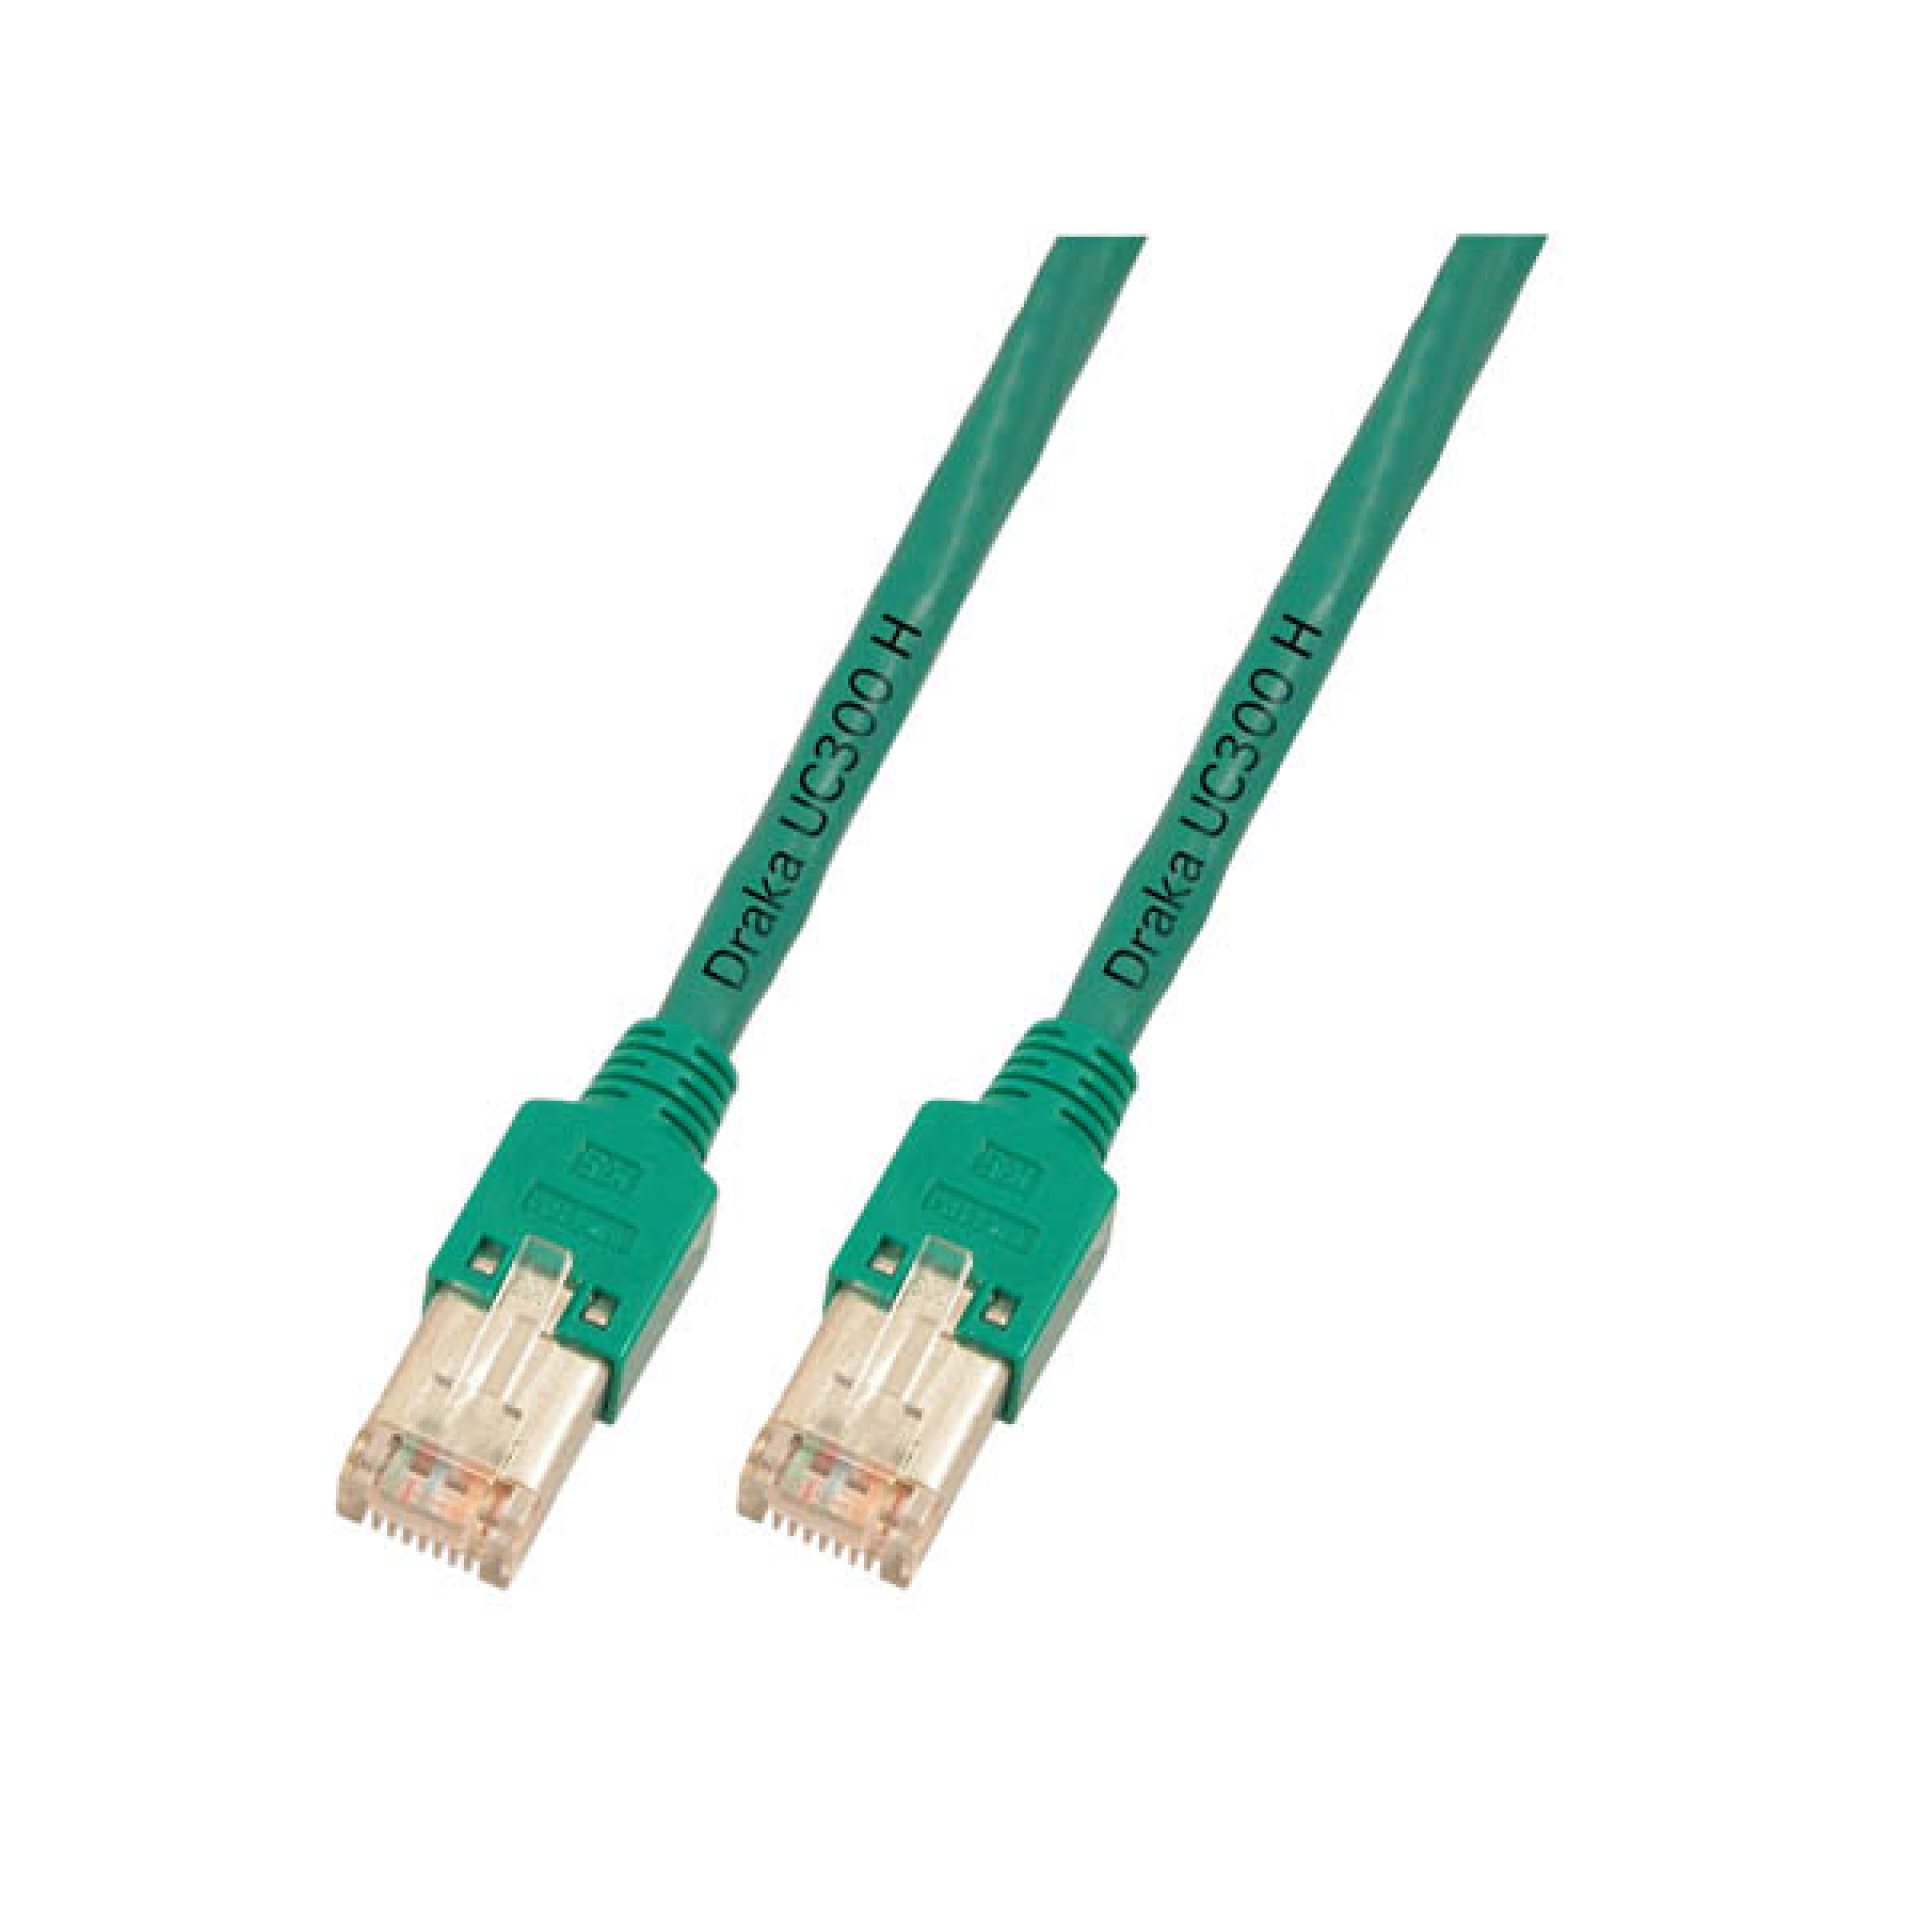 RJ45 Patch cable F/UTP, Cat.5e, TM11, UC300, 0,25m, green